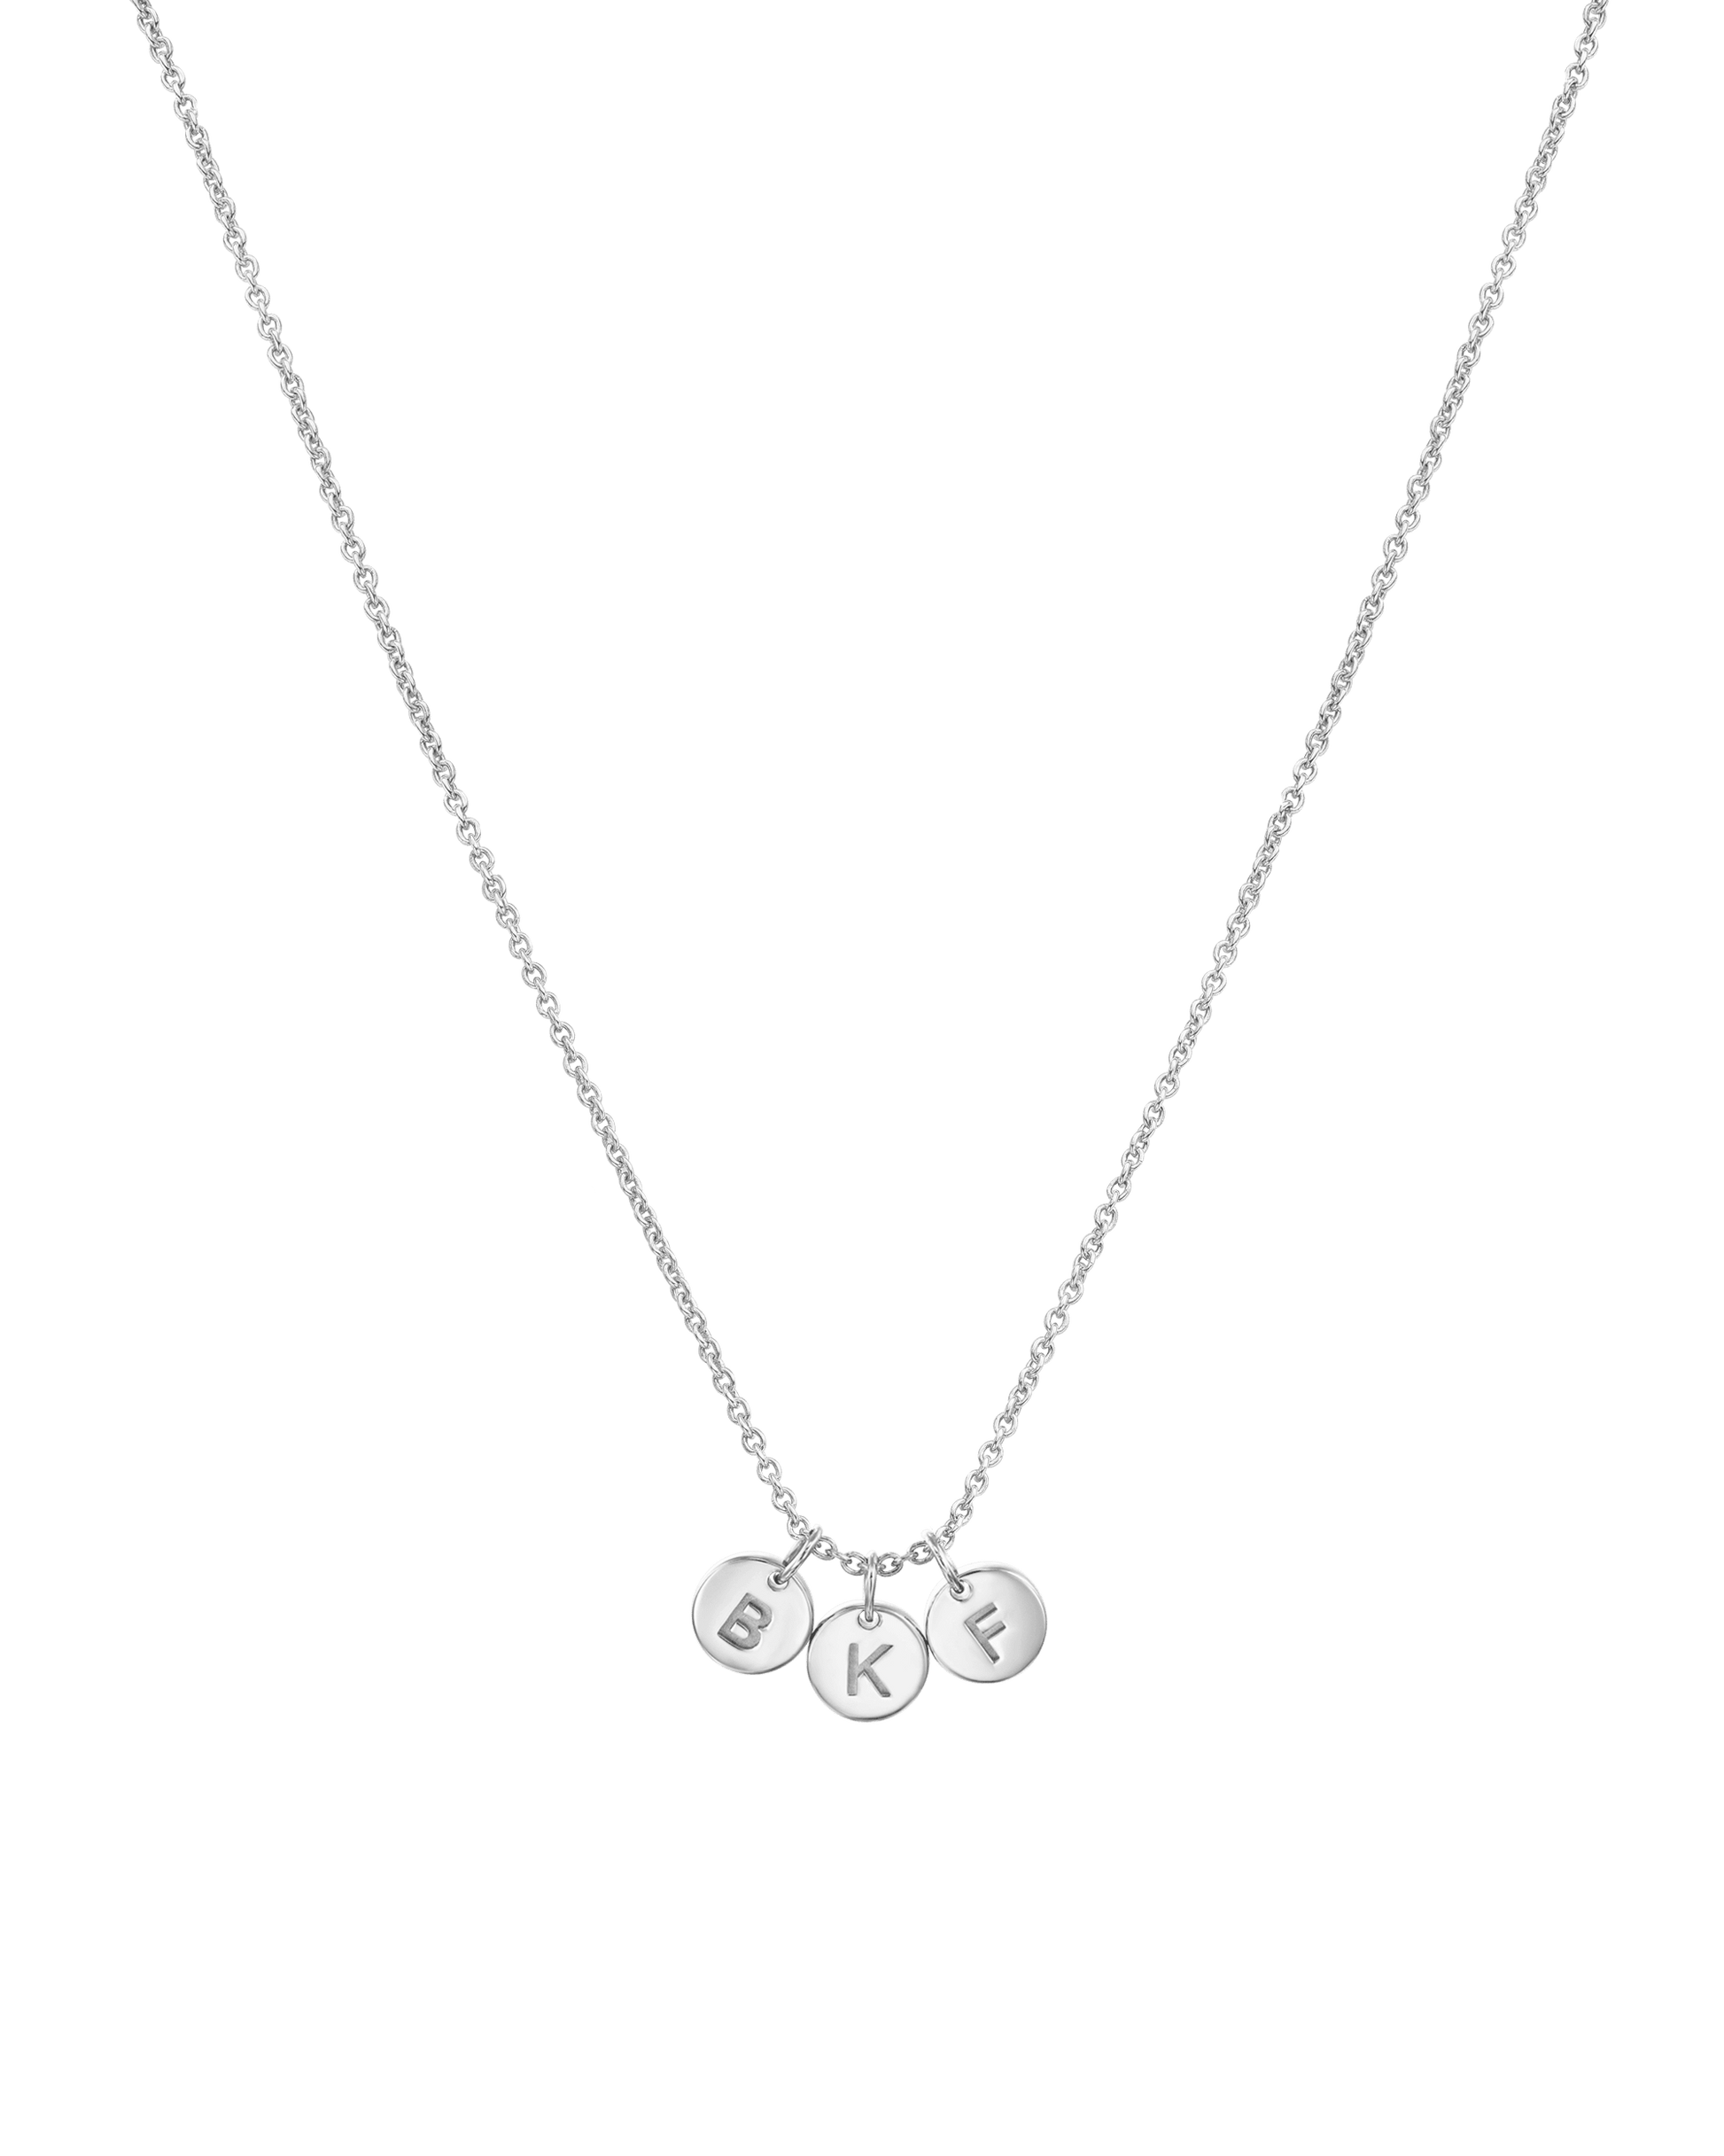 Tiny Initial Disc Necklace - 925 Sterling Silver Necklaces magal-dev 1 Initial 16" 